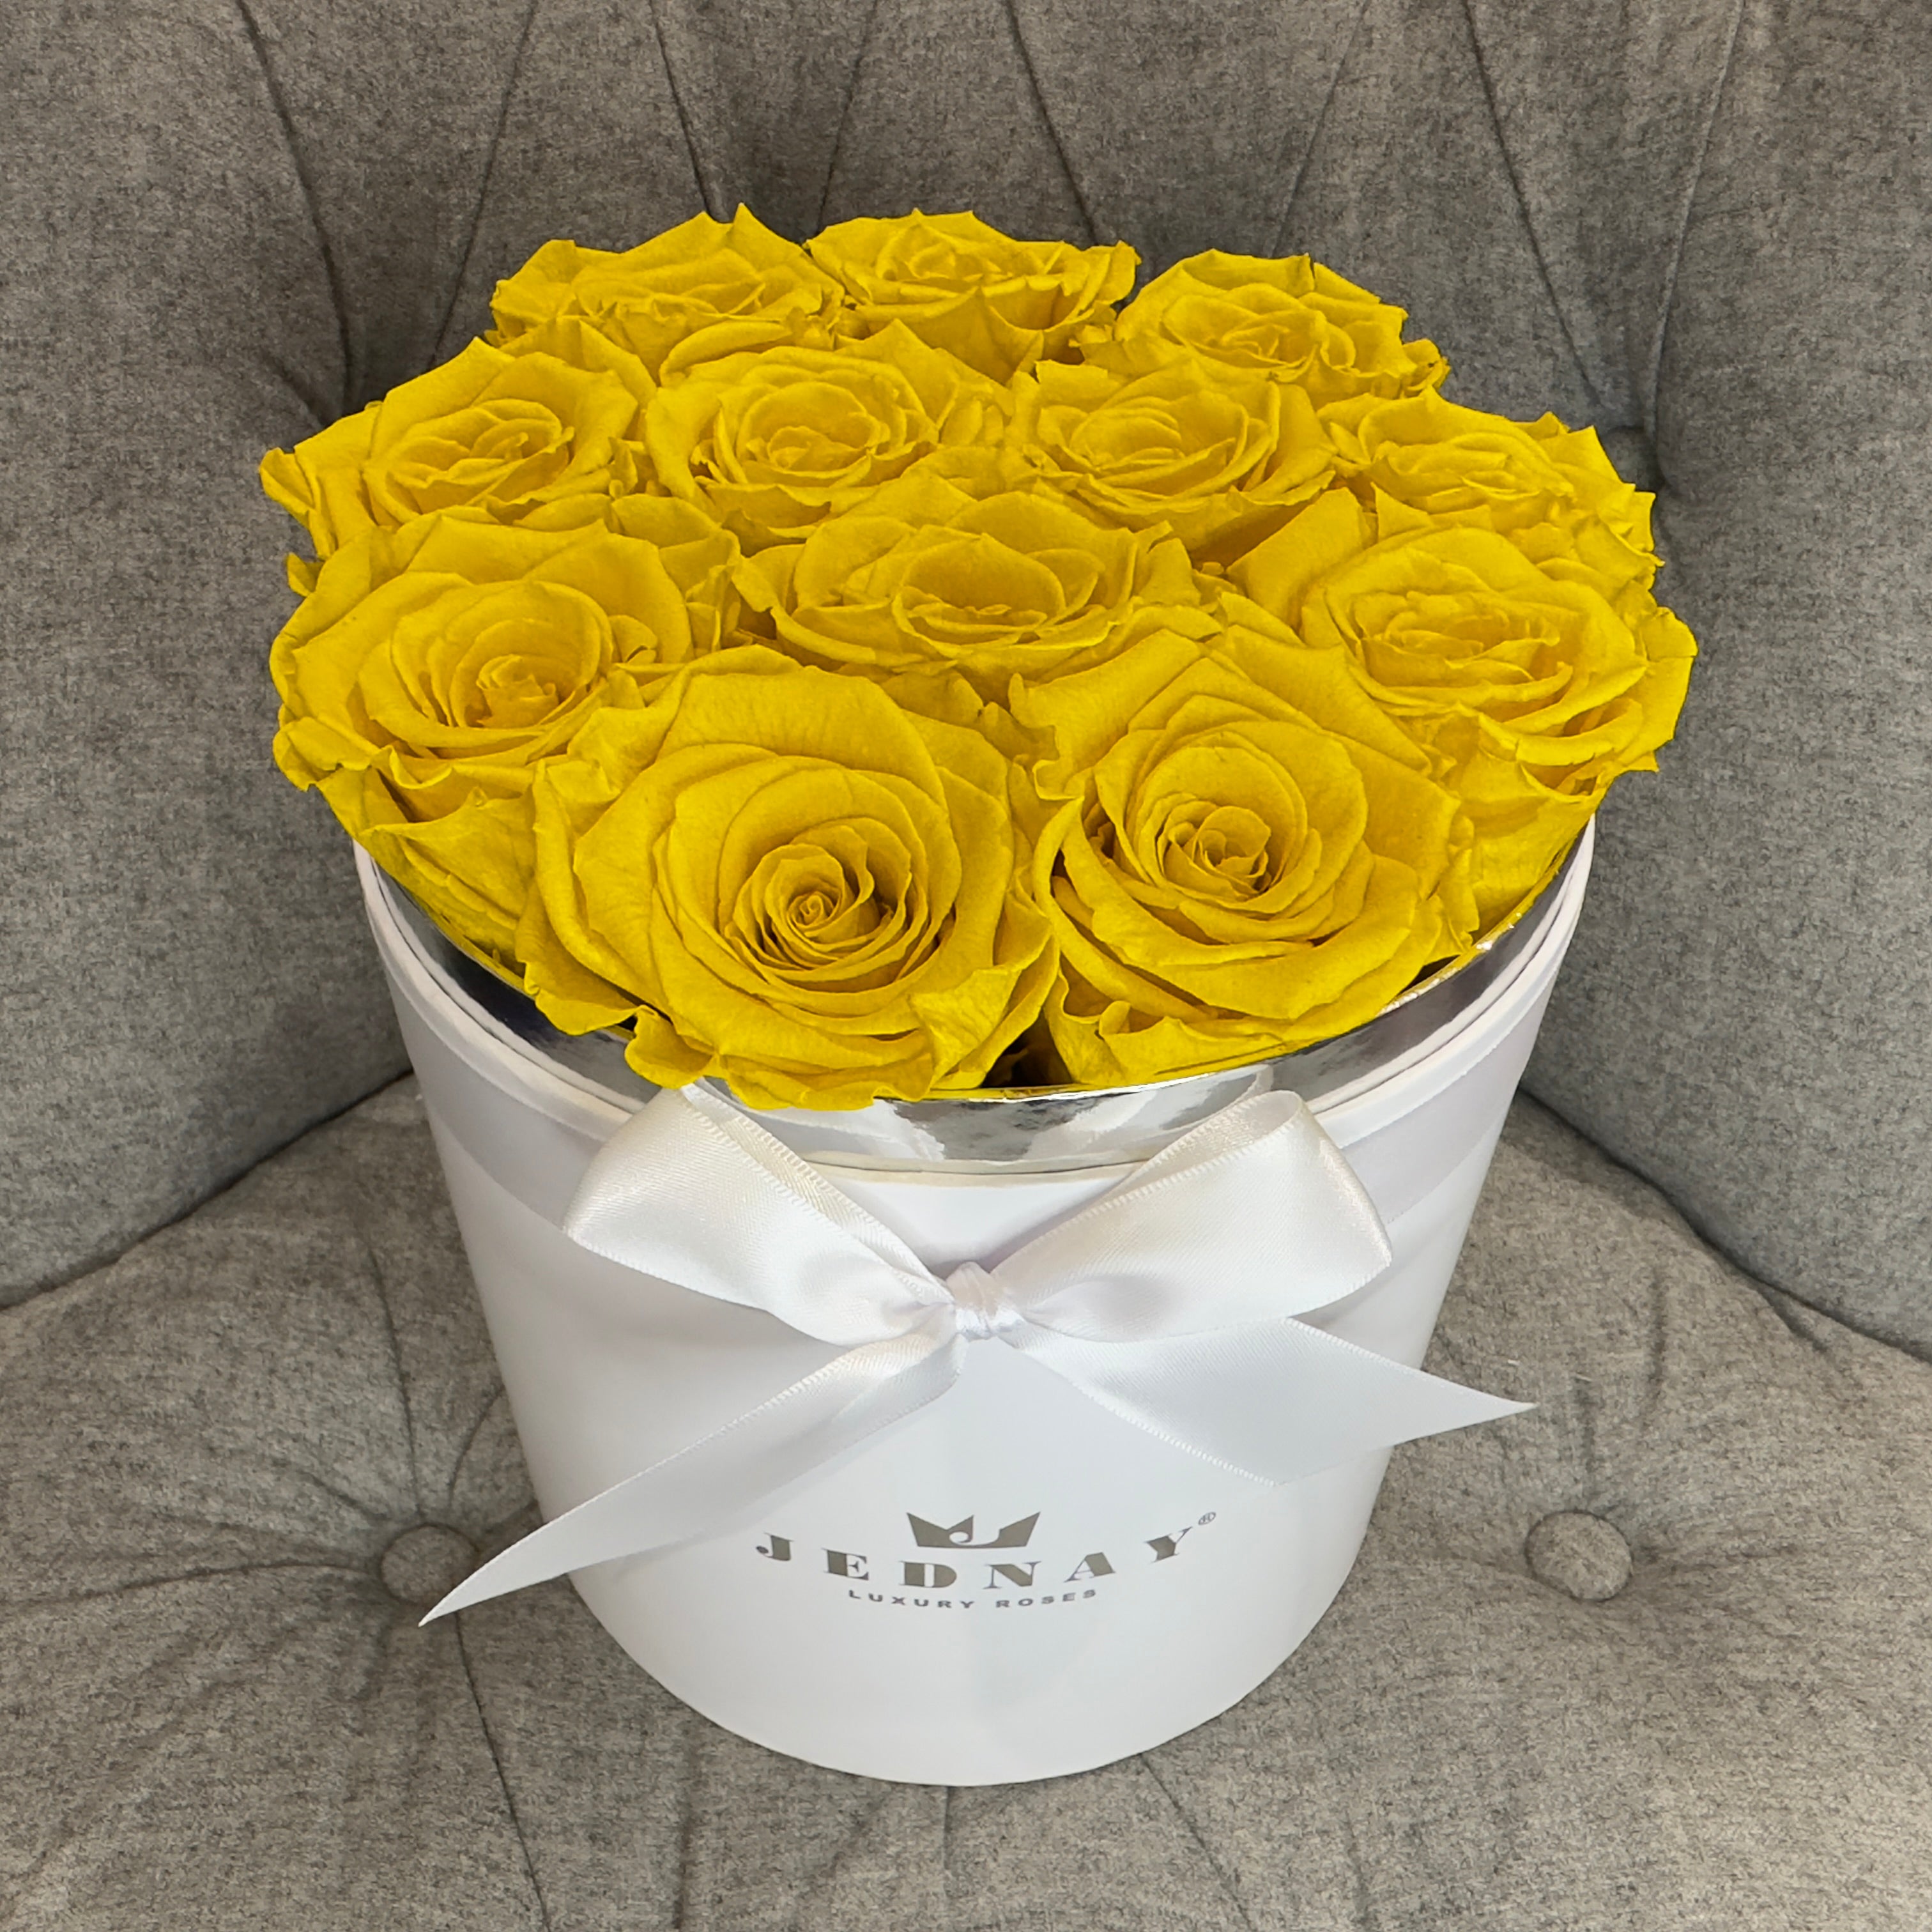 Yellow preserved eternal roses in a large round white gift box by Jednay 